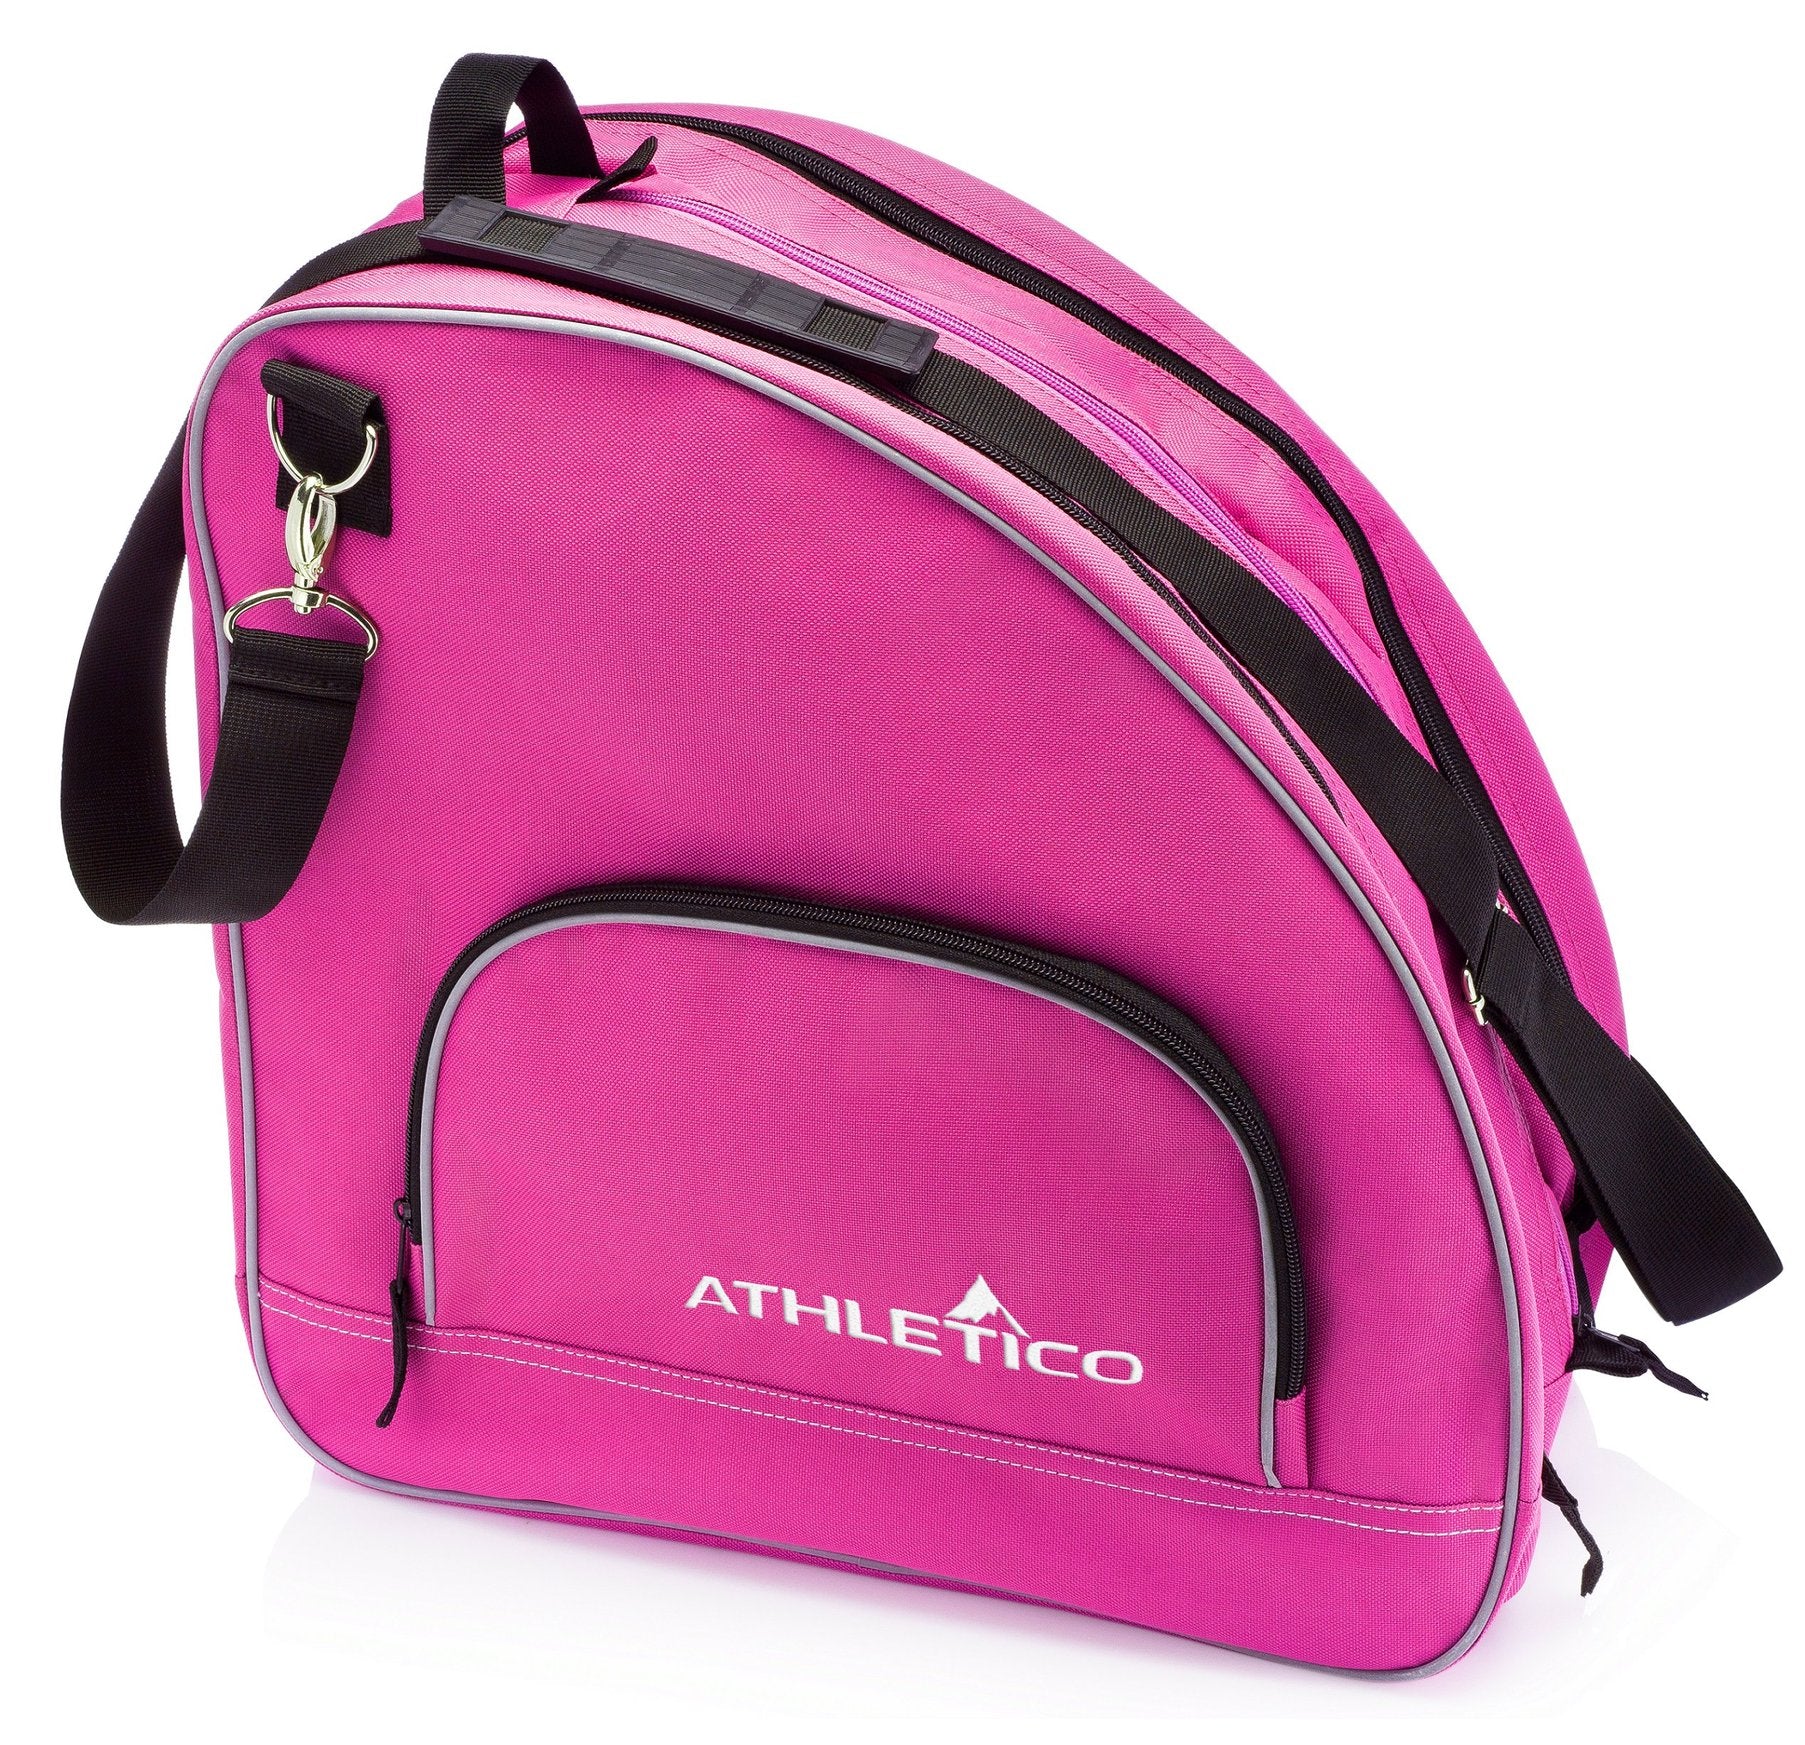 Athletico Ice & Inline Skate Bag - Premium Bag to Carry Ice Skates, Roller Skates, Inline Skates for Both Kids and Adults (Pink)